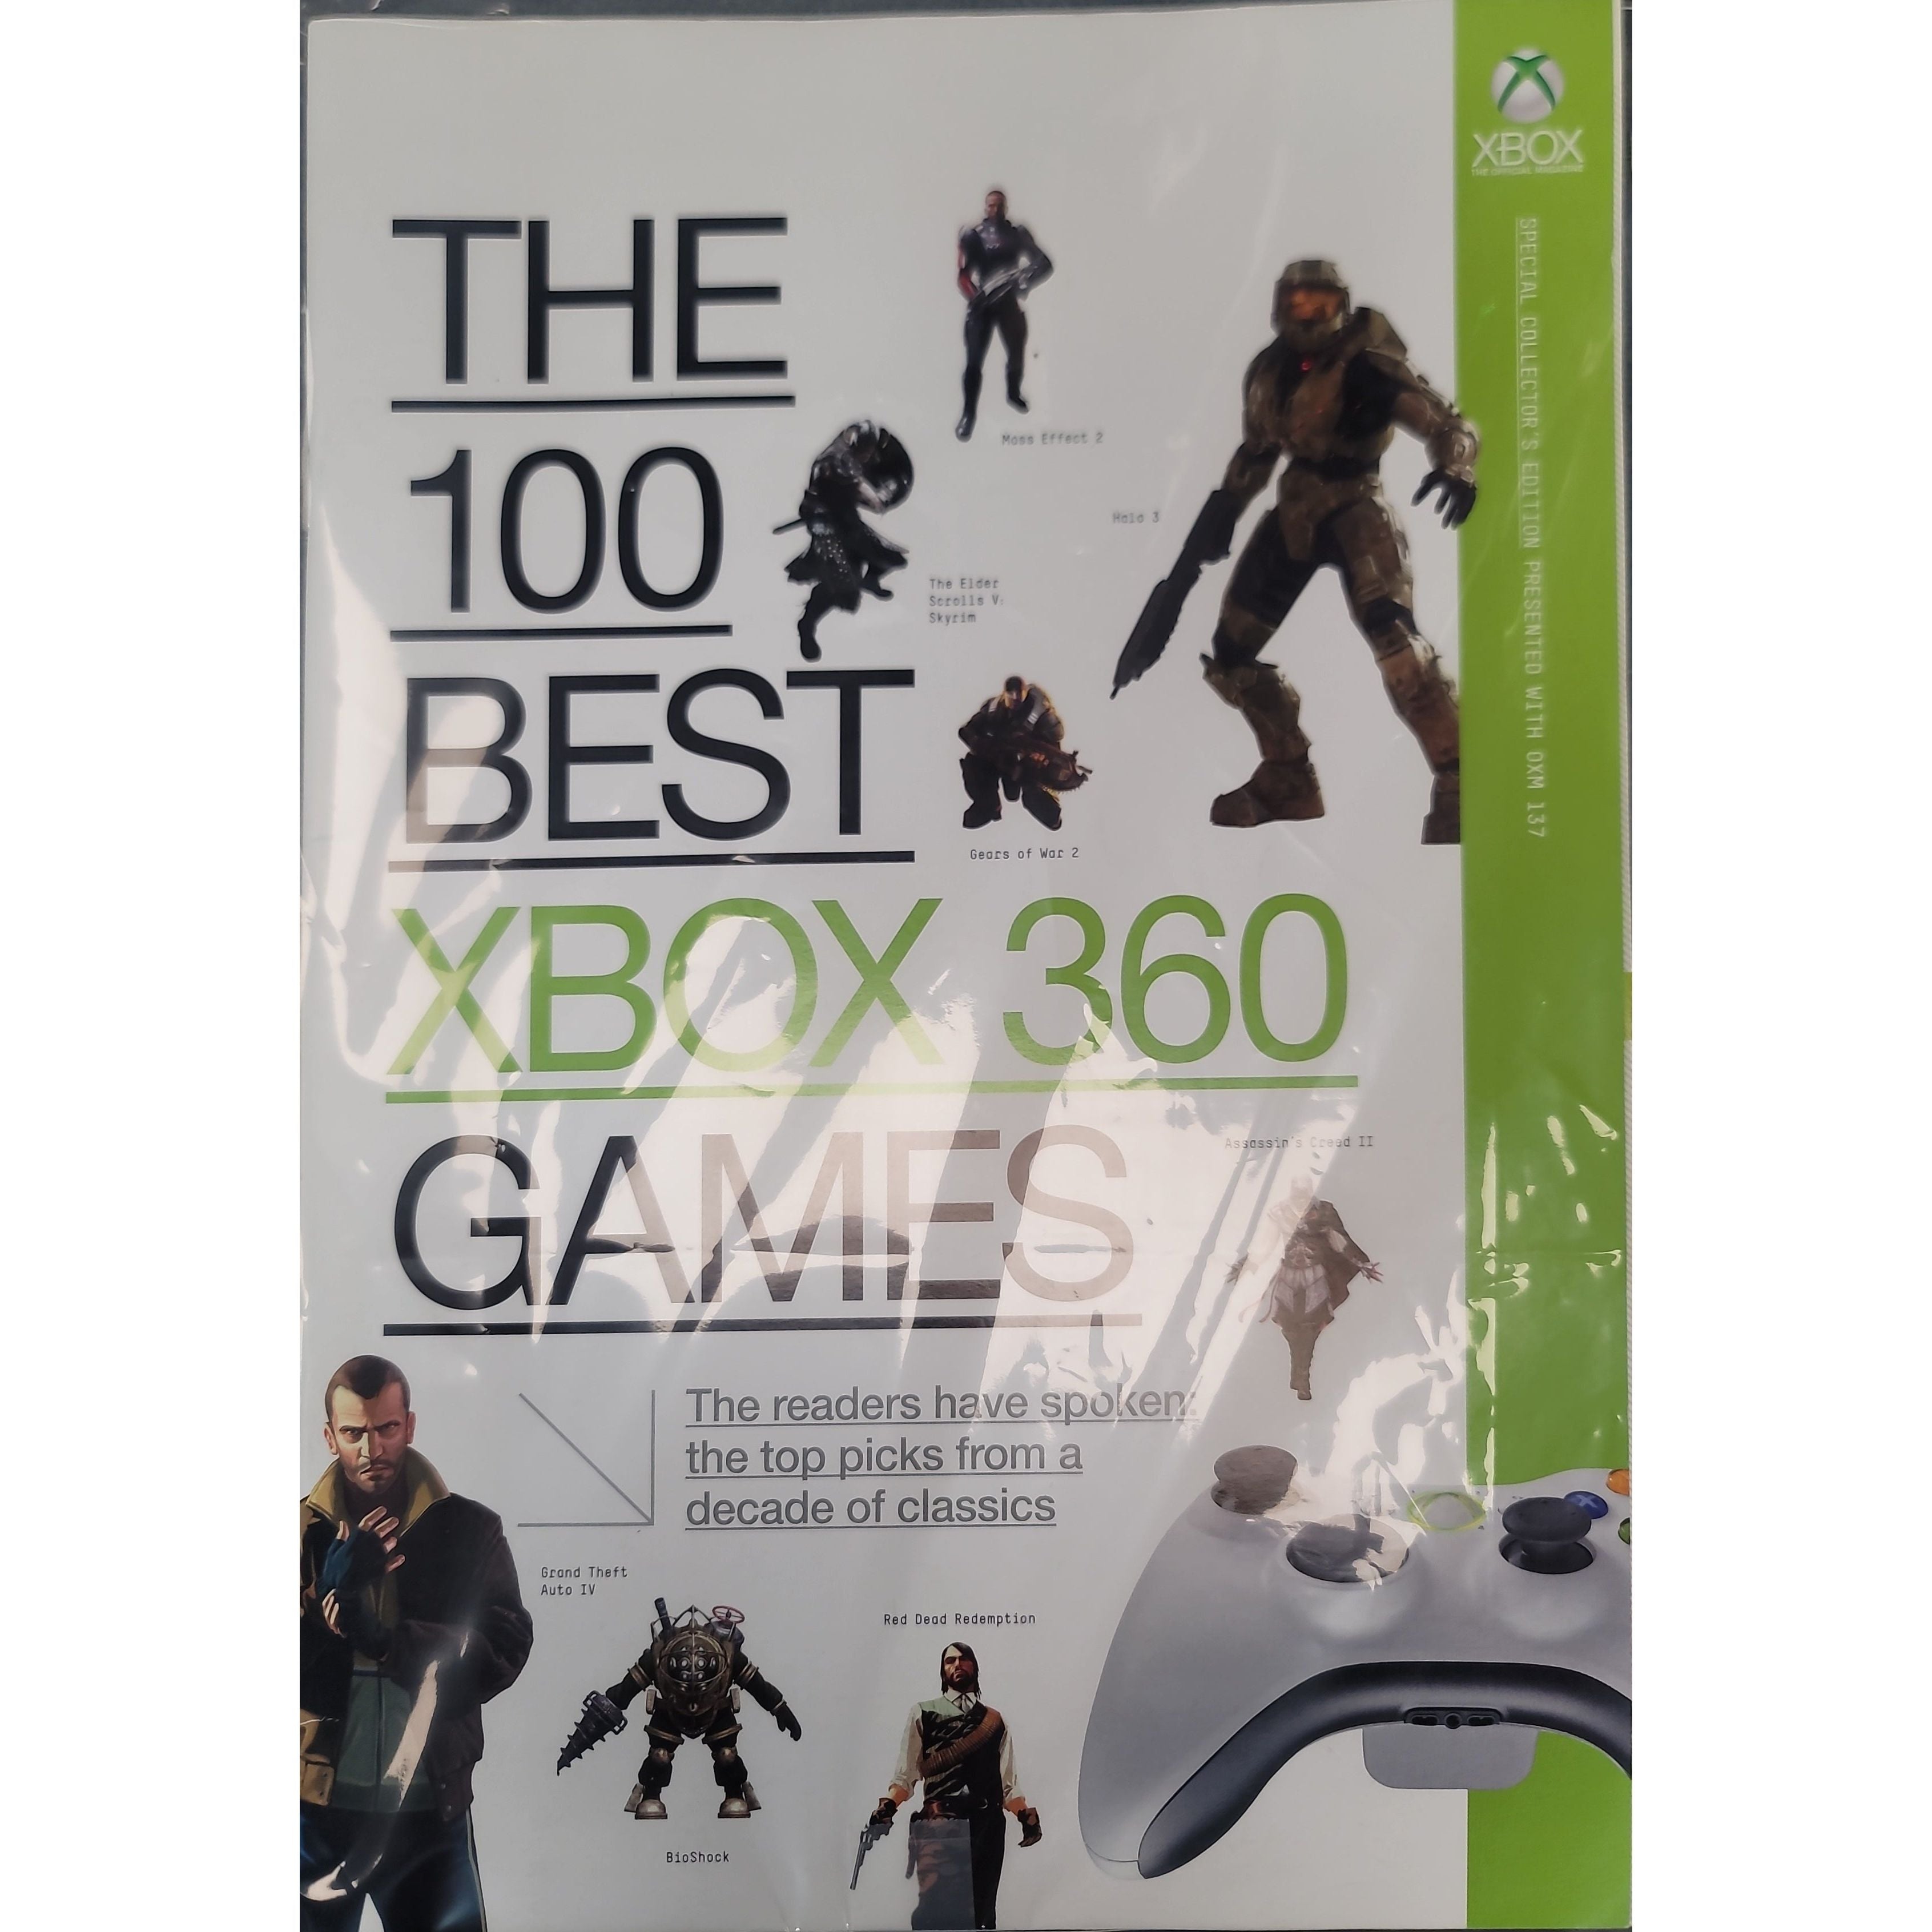 Official Xbox Magazine - The 100 Best Xbox 360 Games